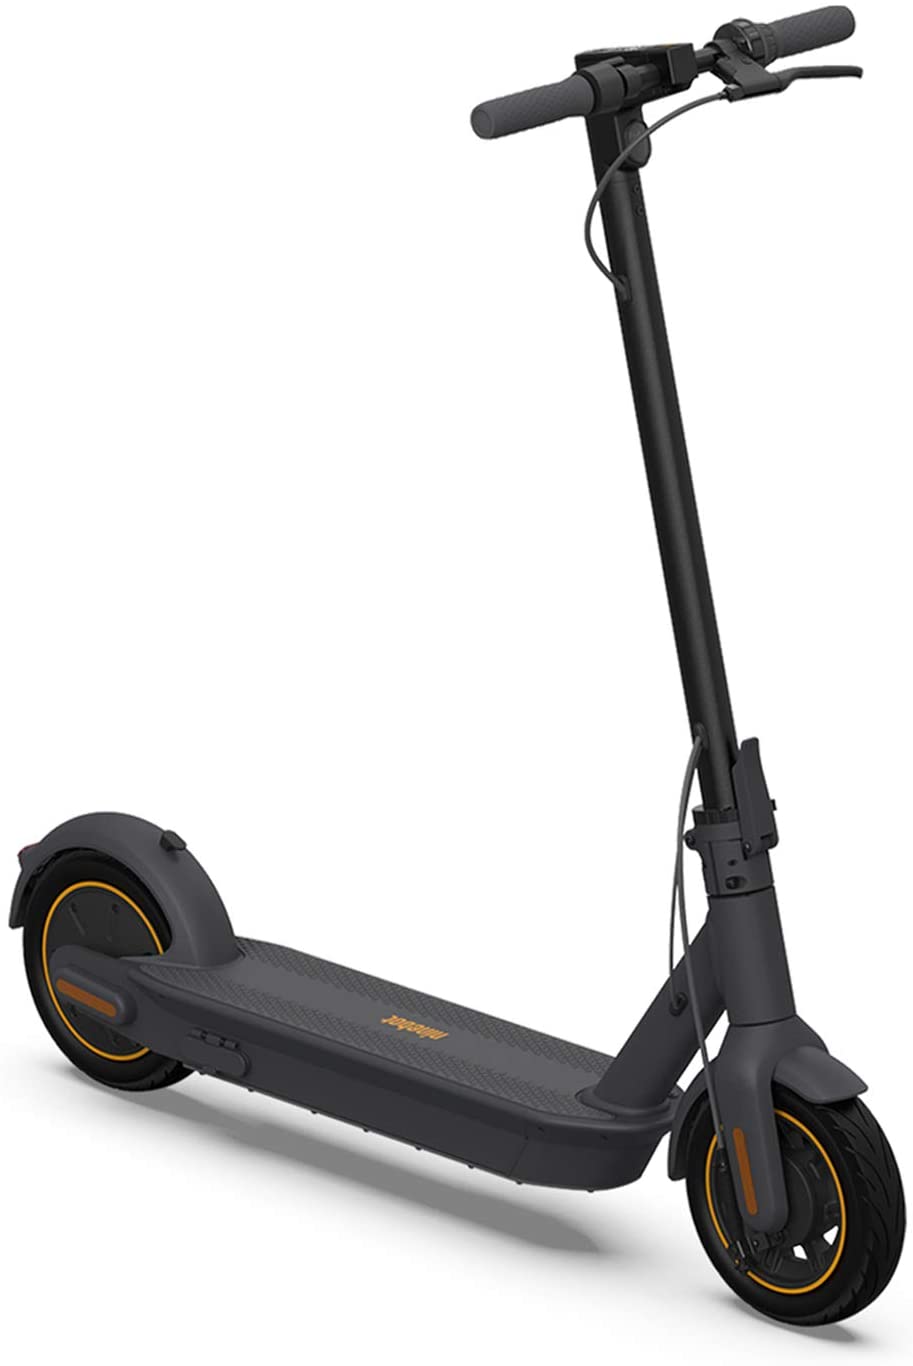 Segway Ninebot Max (18.6 MPH) Best Electric Scooter